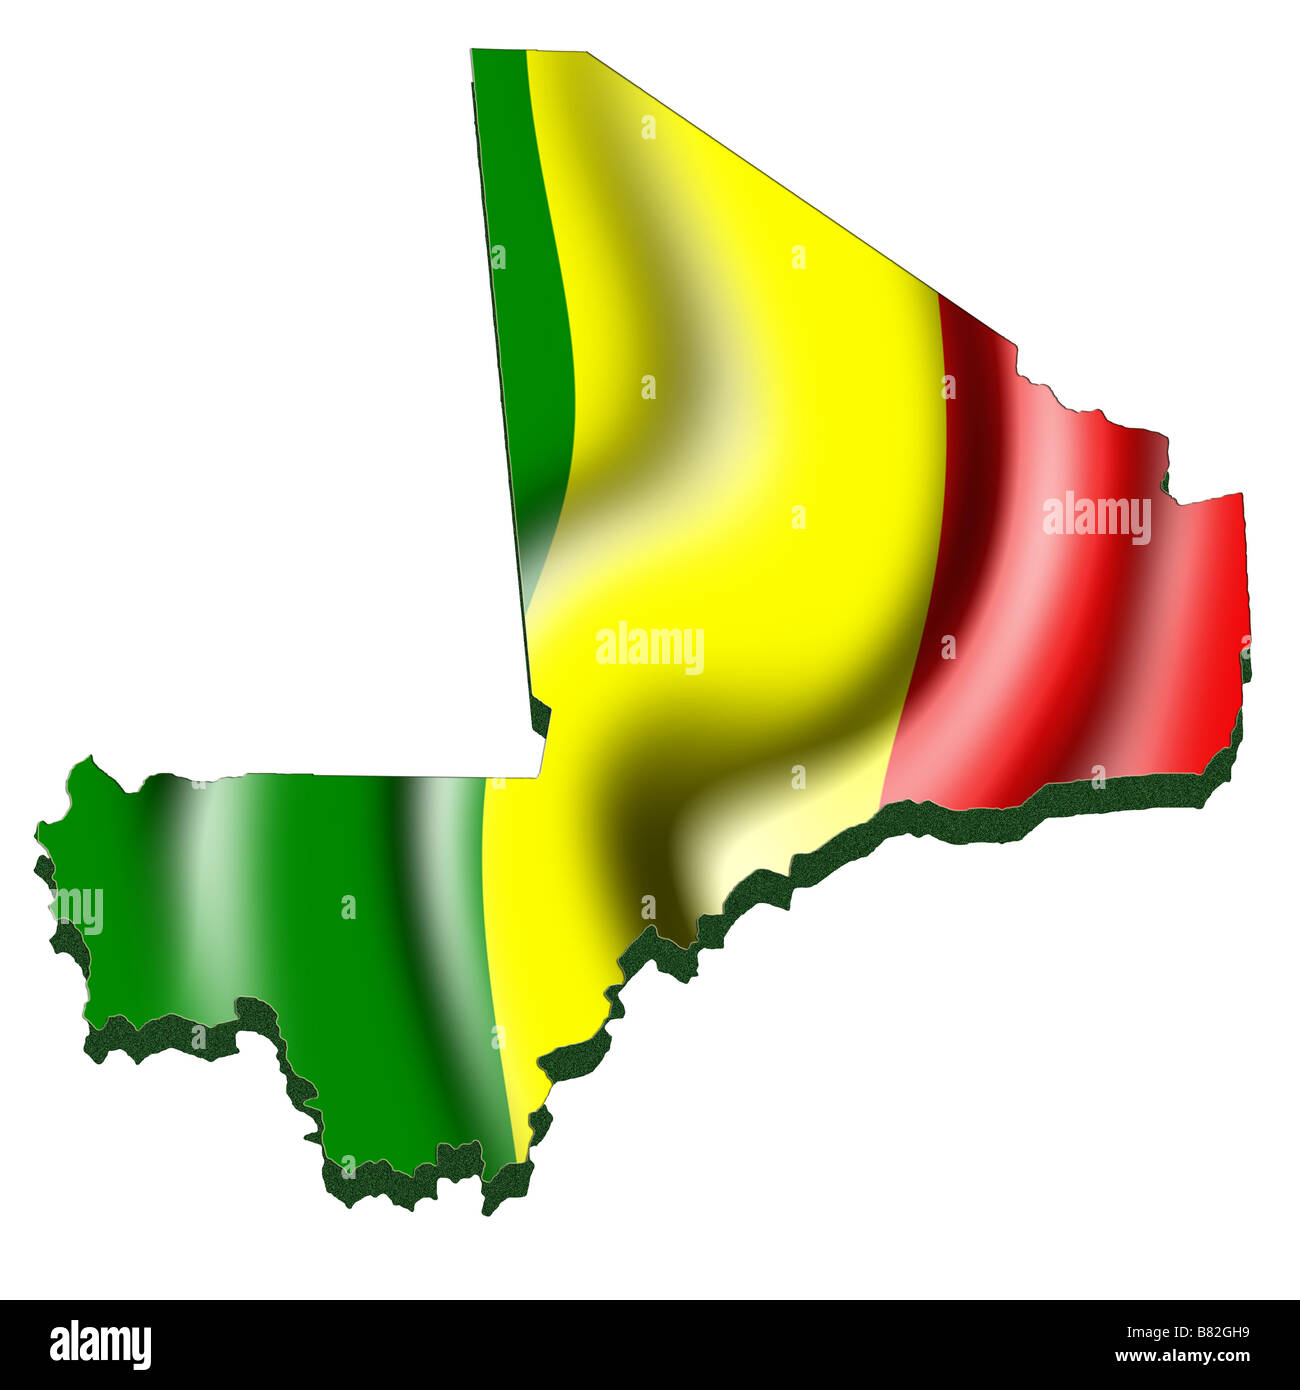 Outline map and flag of Mali Stock Photo - Alamy